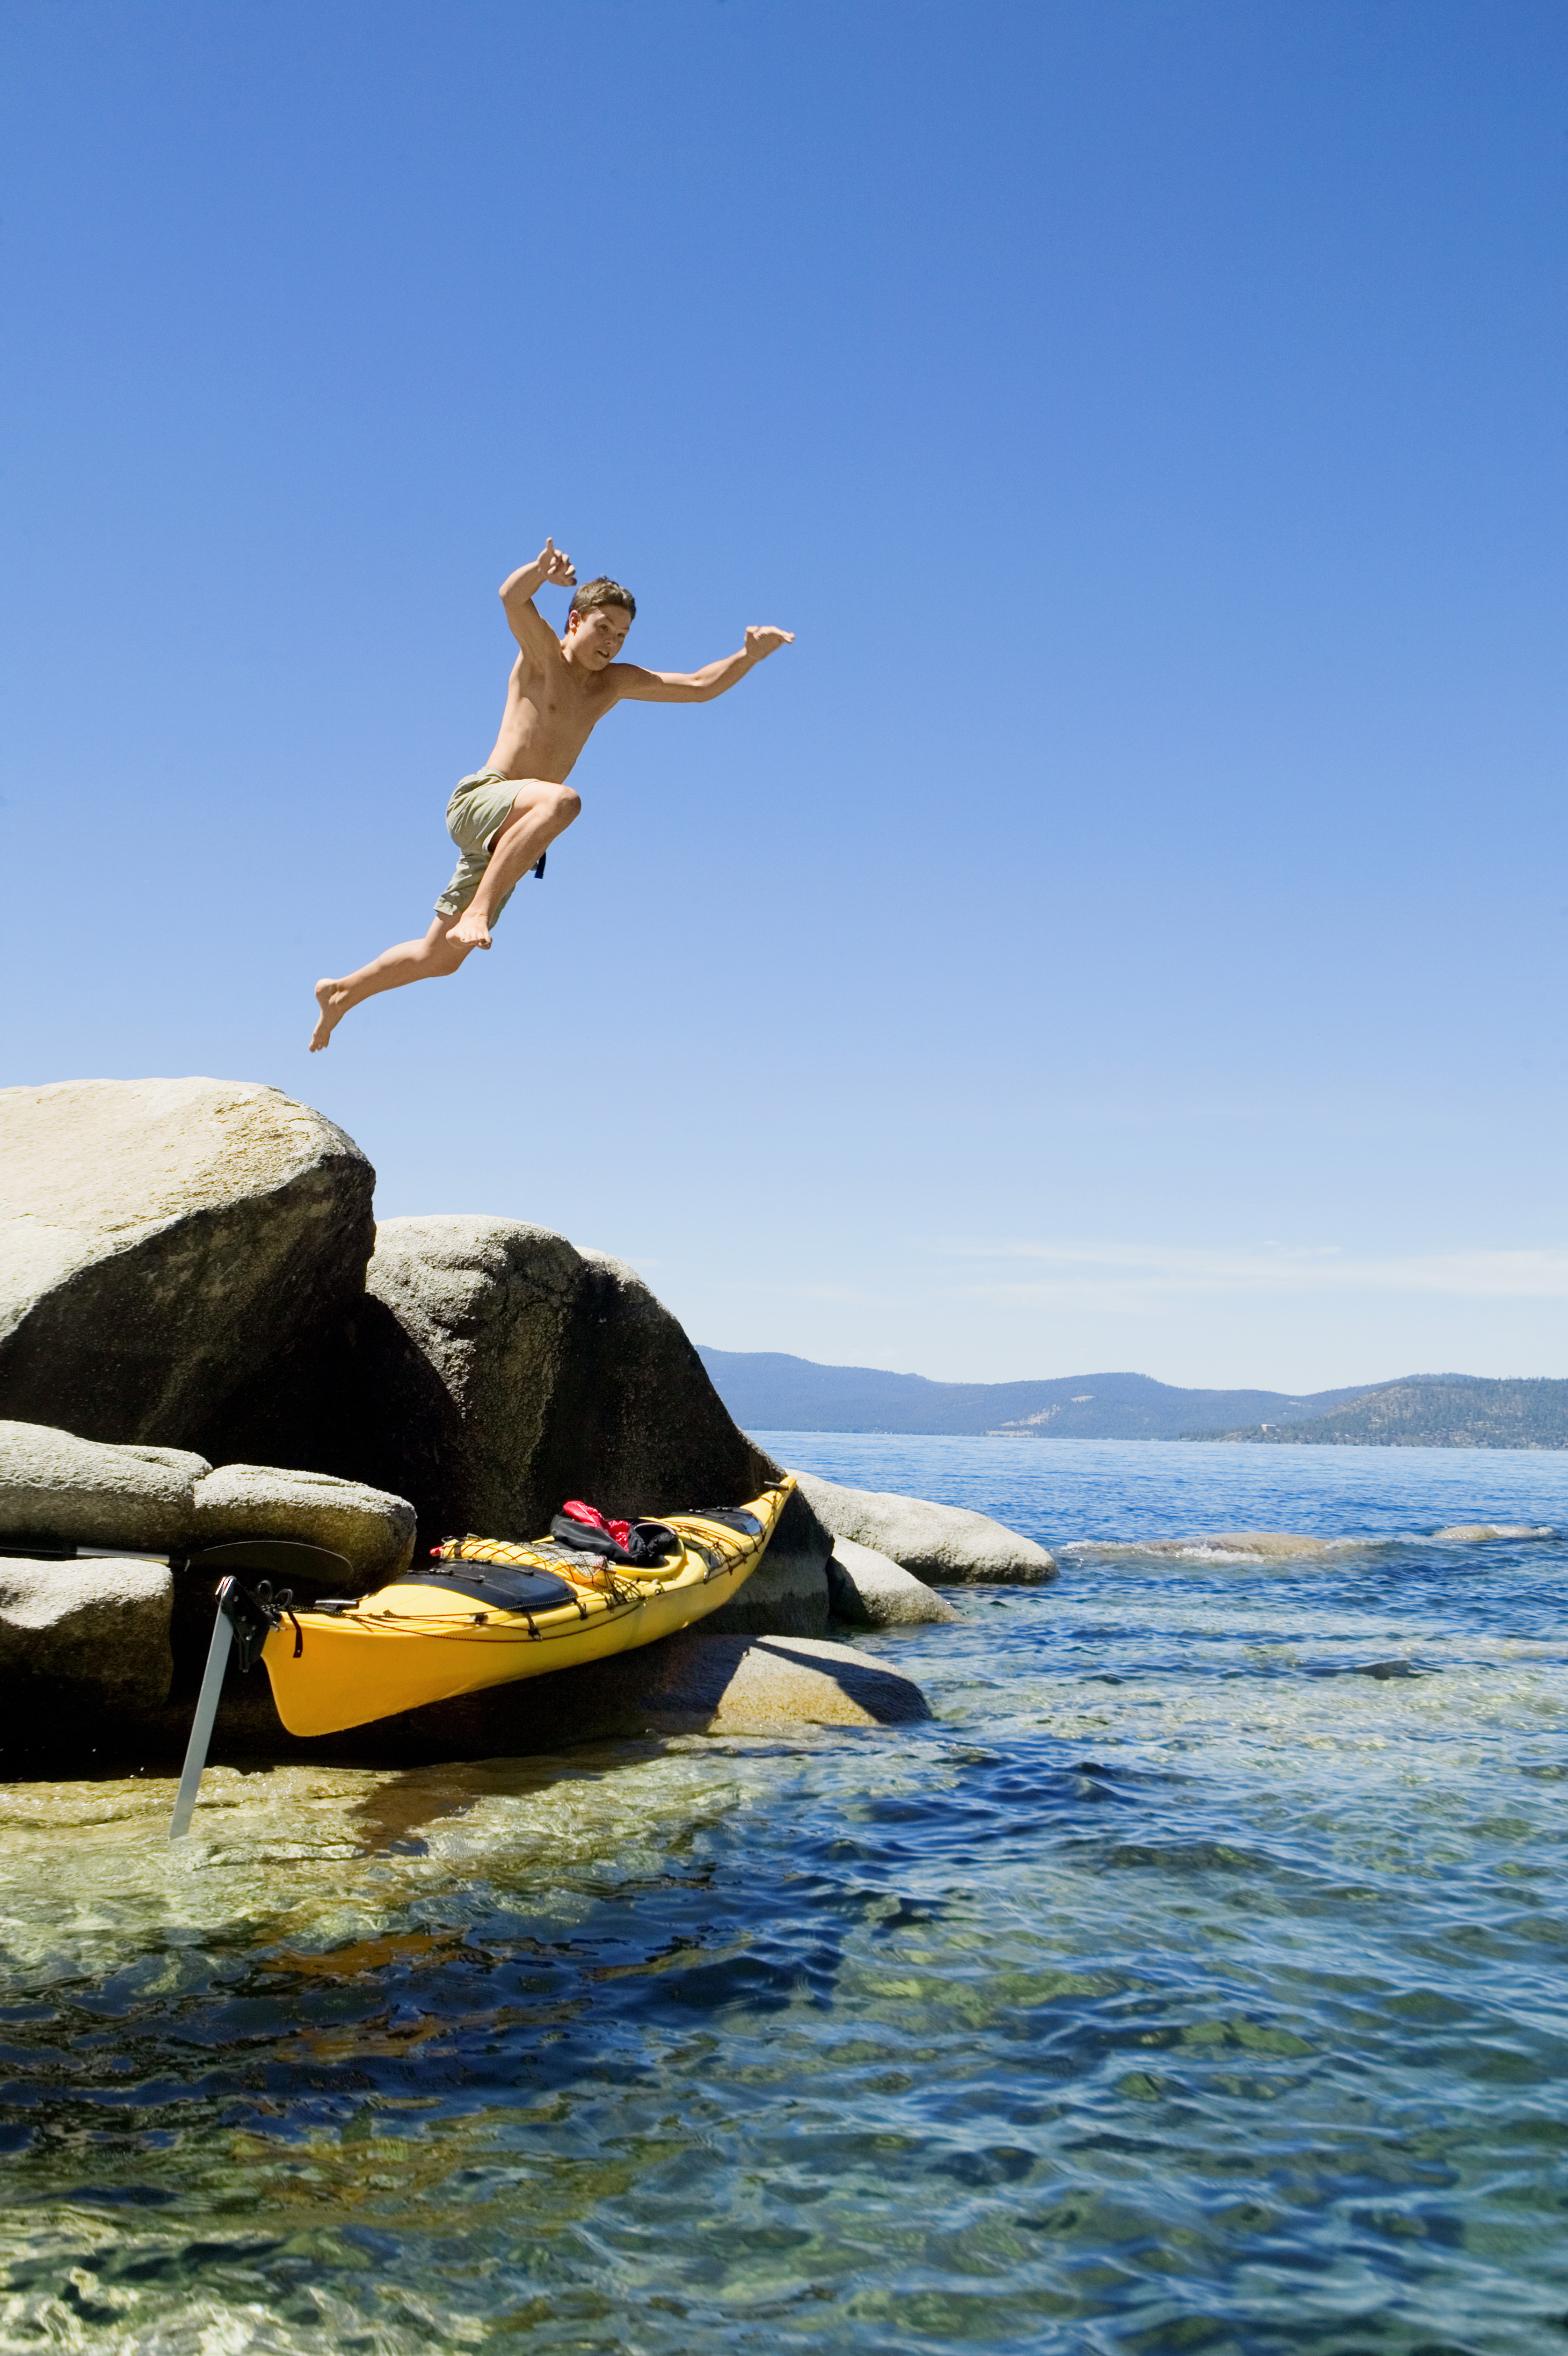 Teenage boy jumping from rocks into water